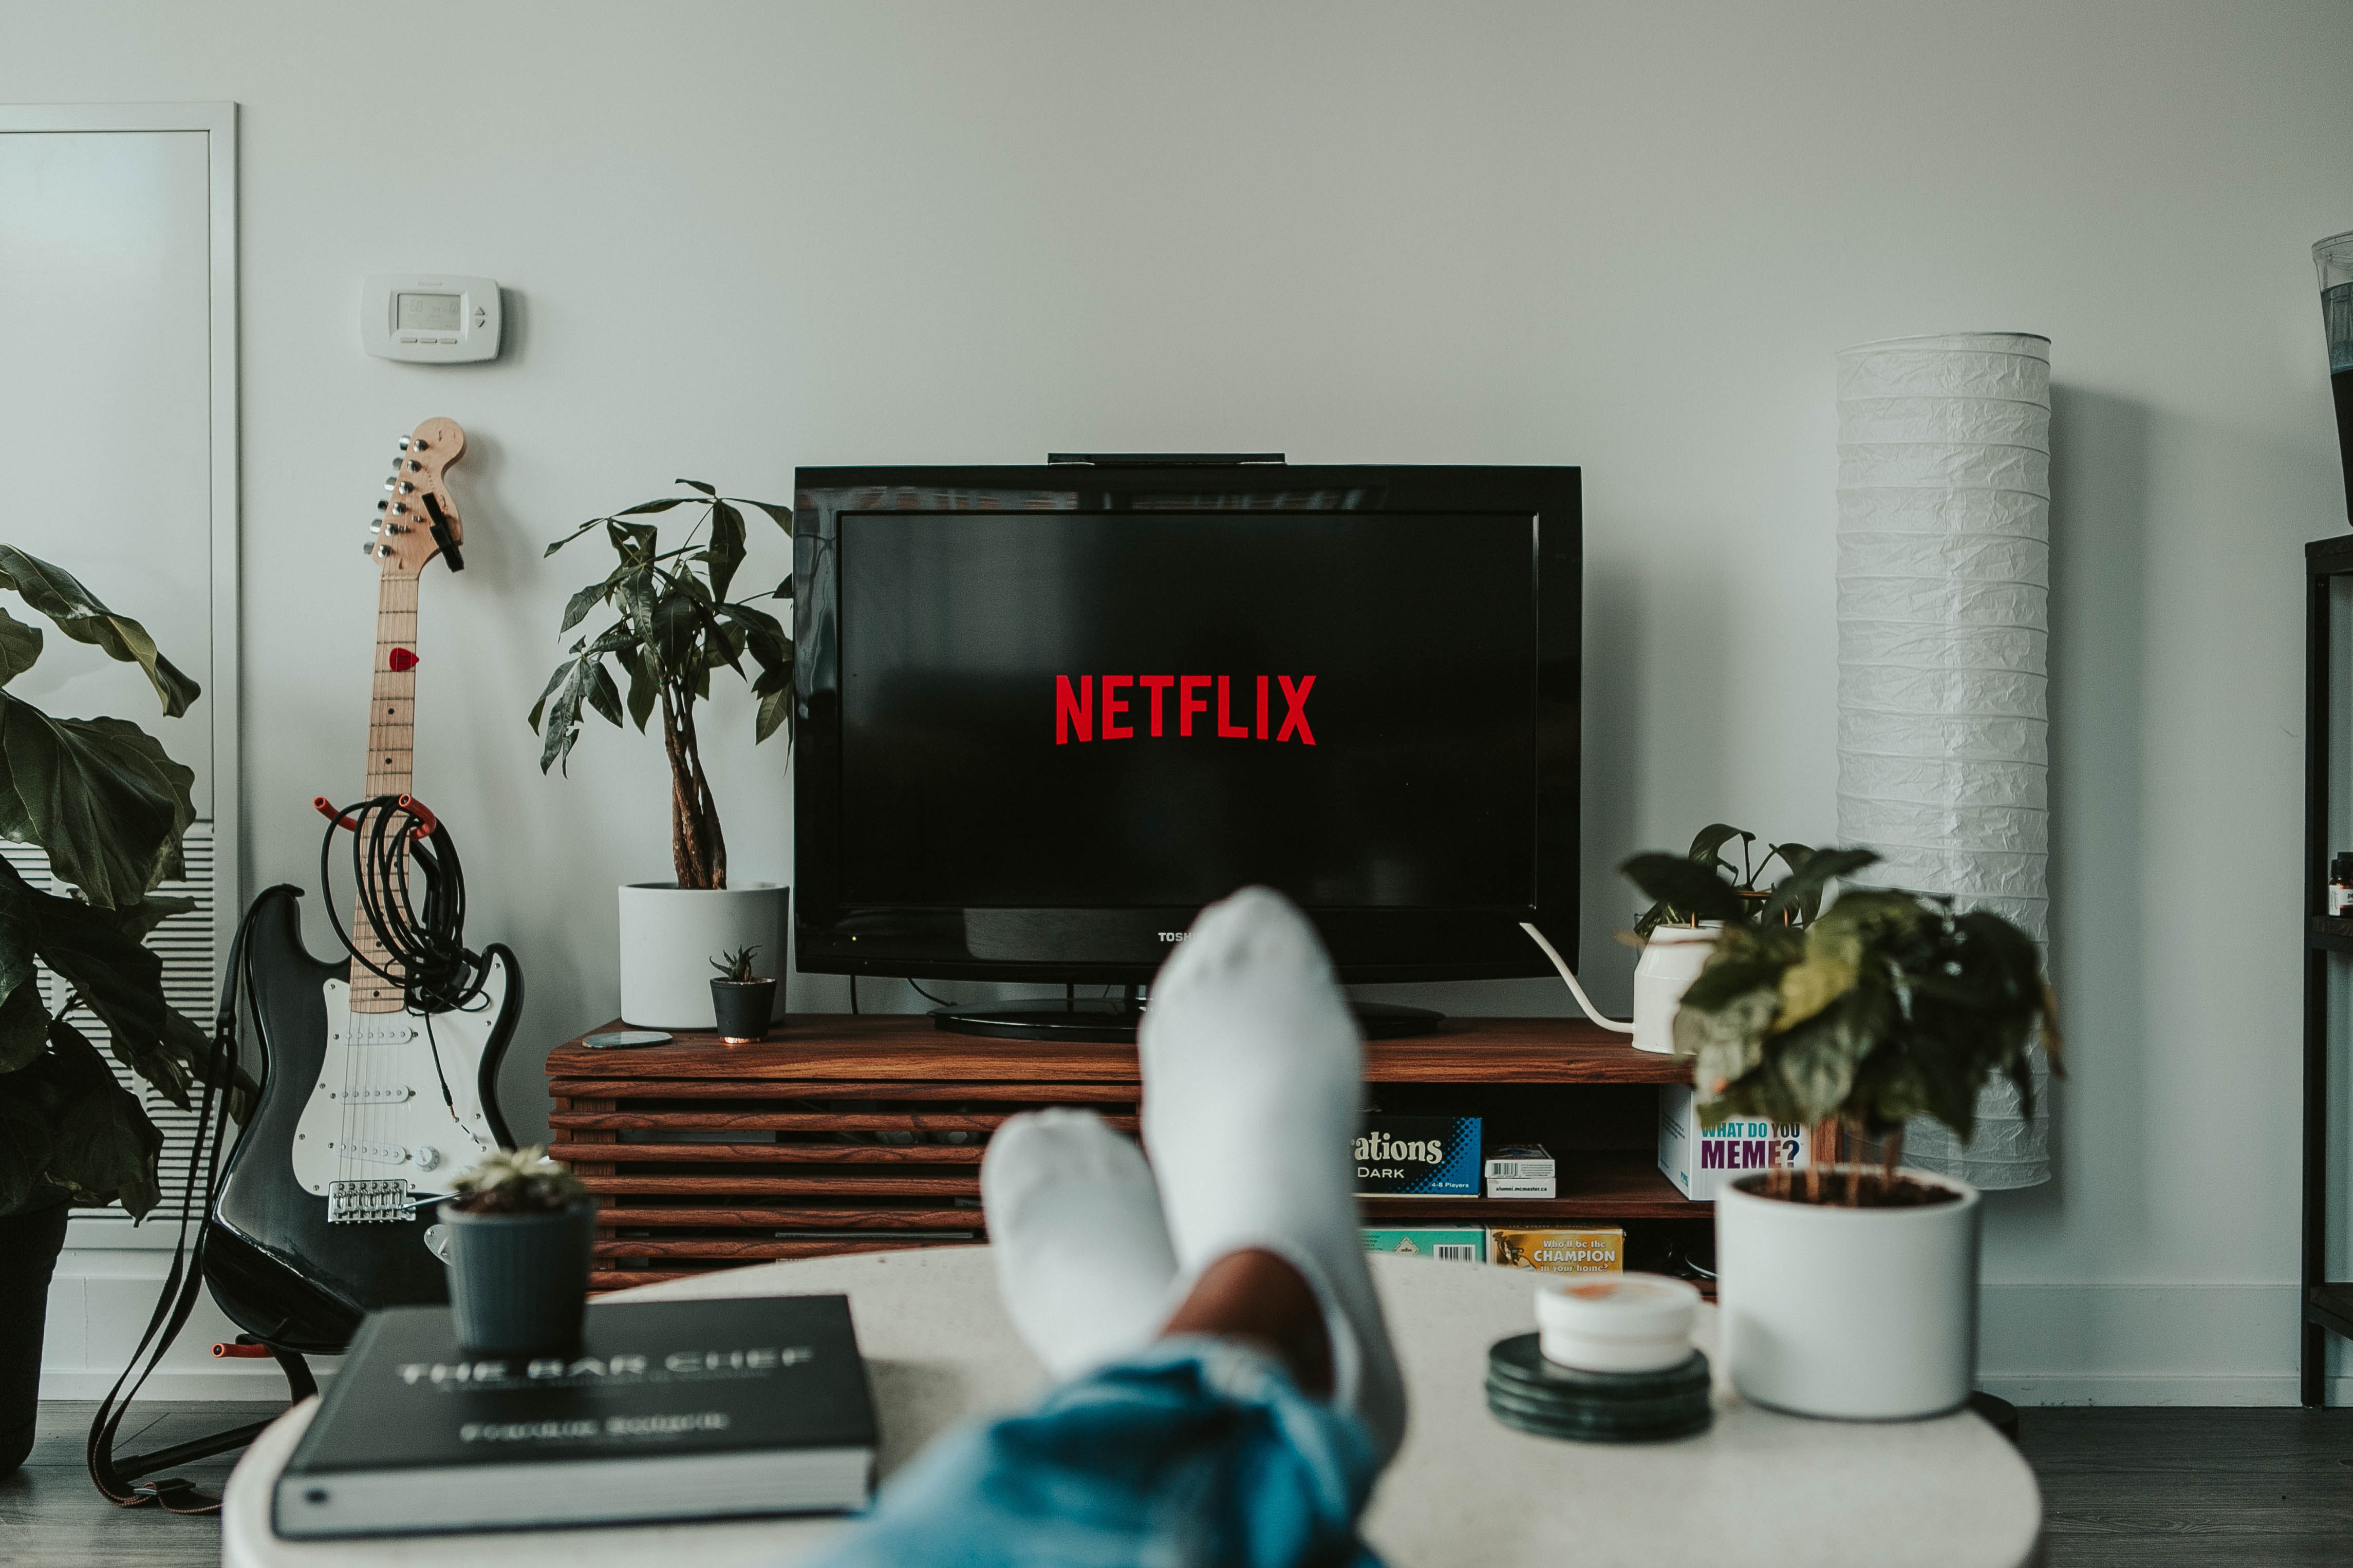 Wineflix and chill: pairing De Iuliis wines with Netflix times